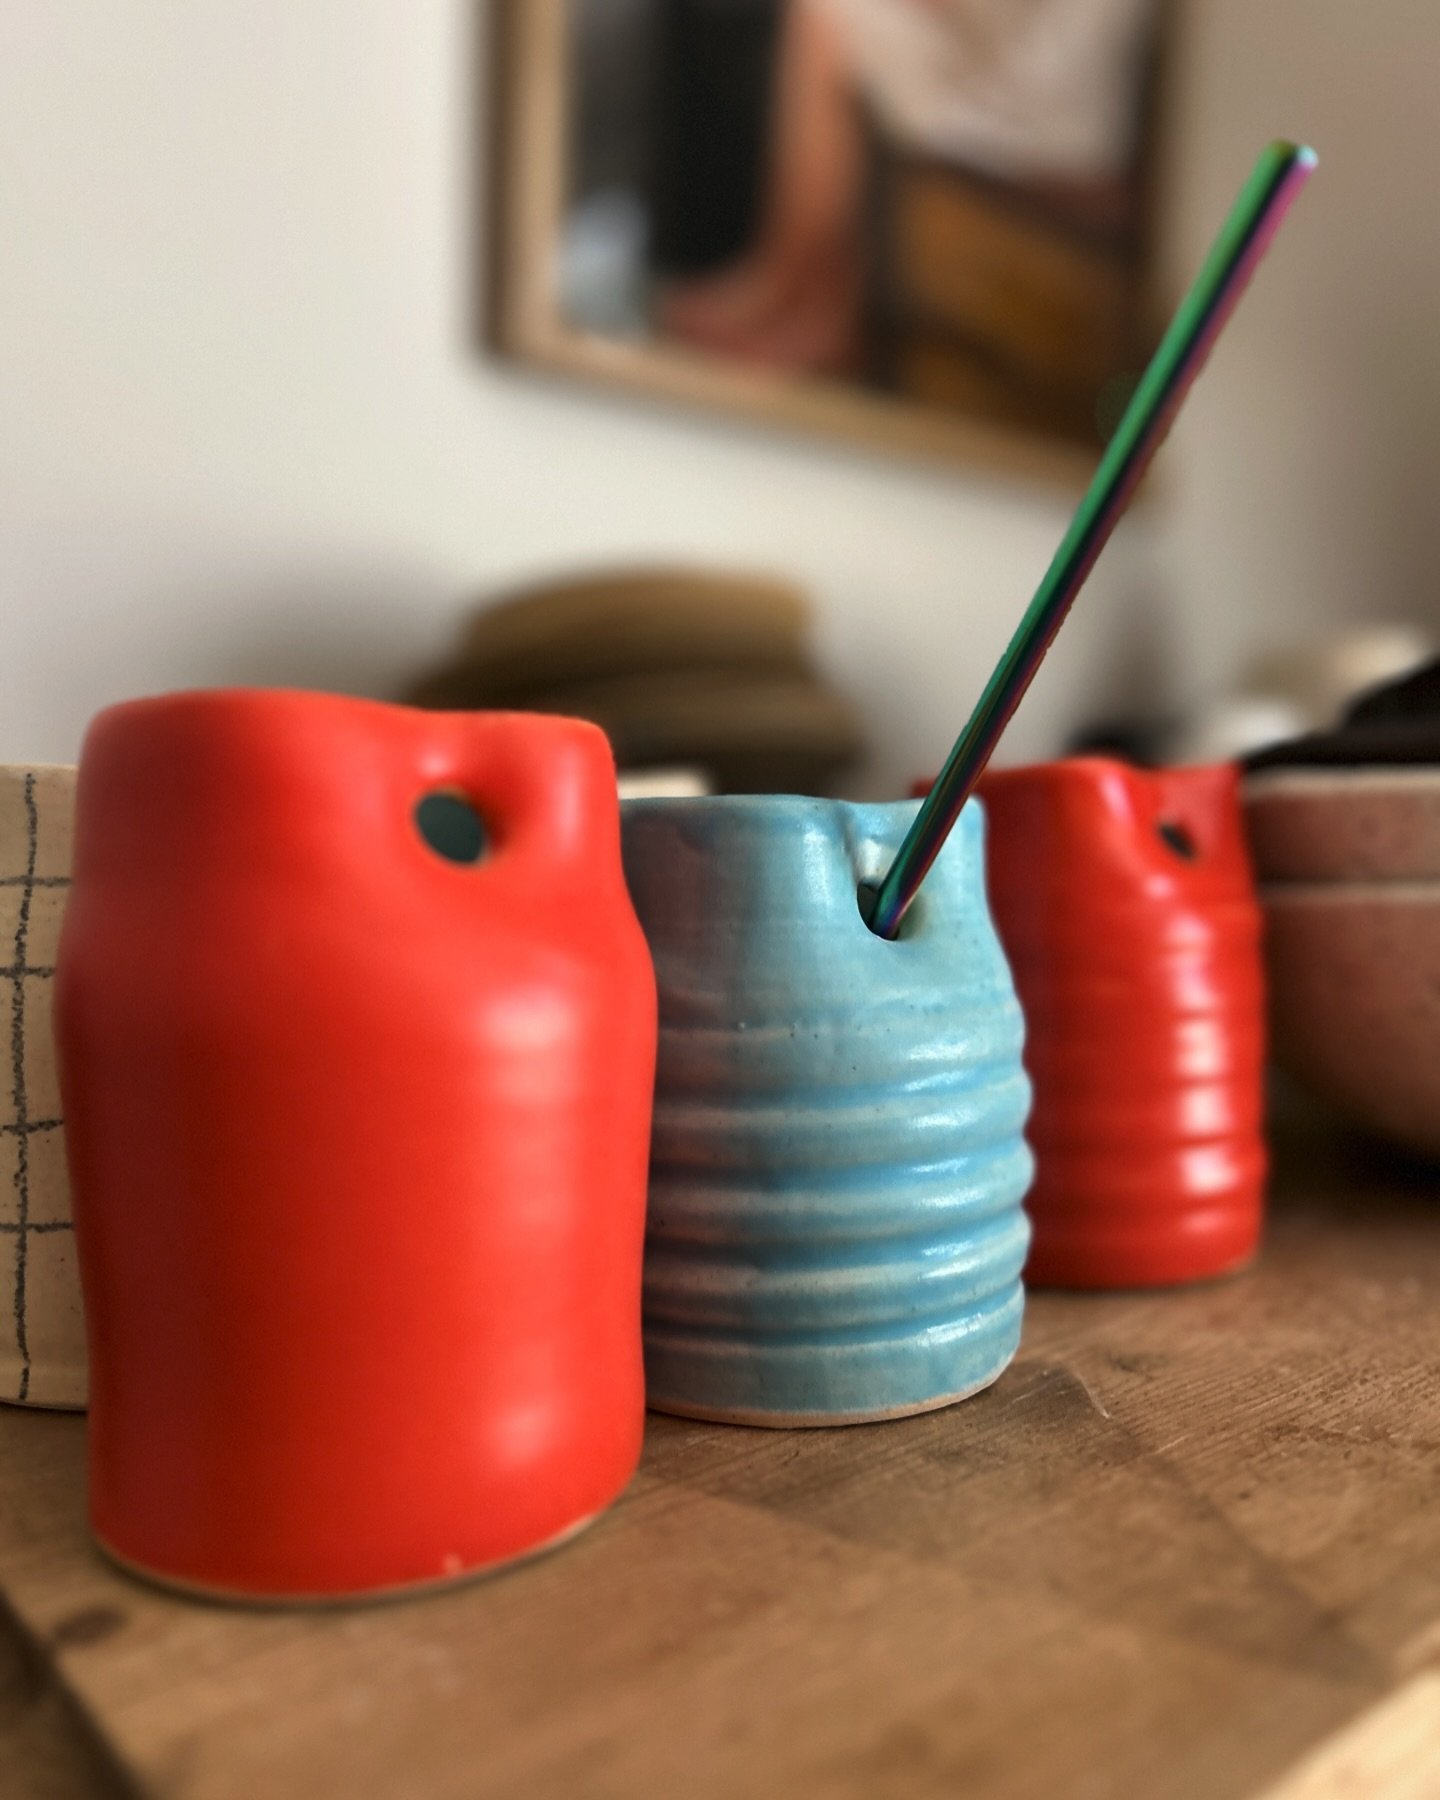 New cheerful and bright sippy cups fresh out of the kiln. Which one would you choose? 

👉DM to claim yours or 

👉 come shop at Hoboken Arts and Music - may 19th

#stoneware #stonewarepottery #ceramics #ceramicart #wheelthrown #wheelthrownpottery #c